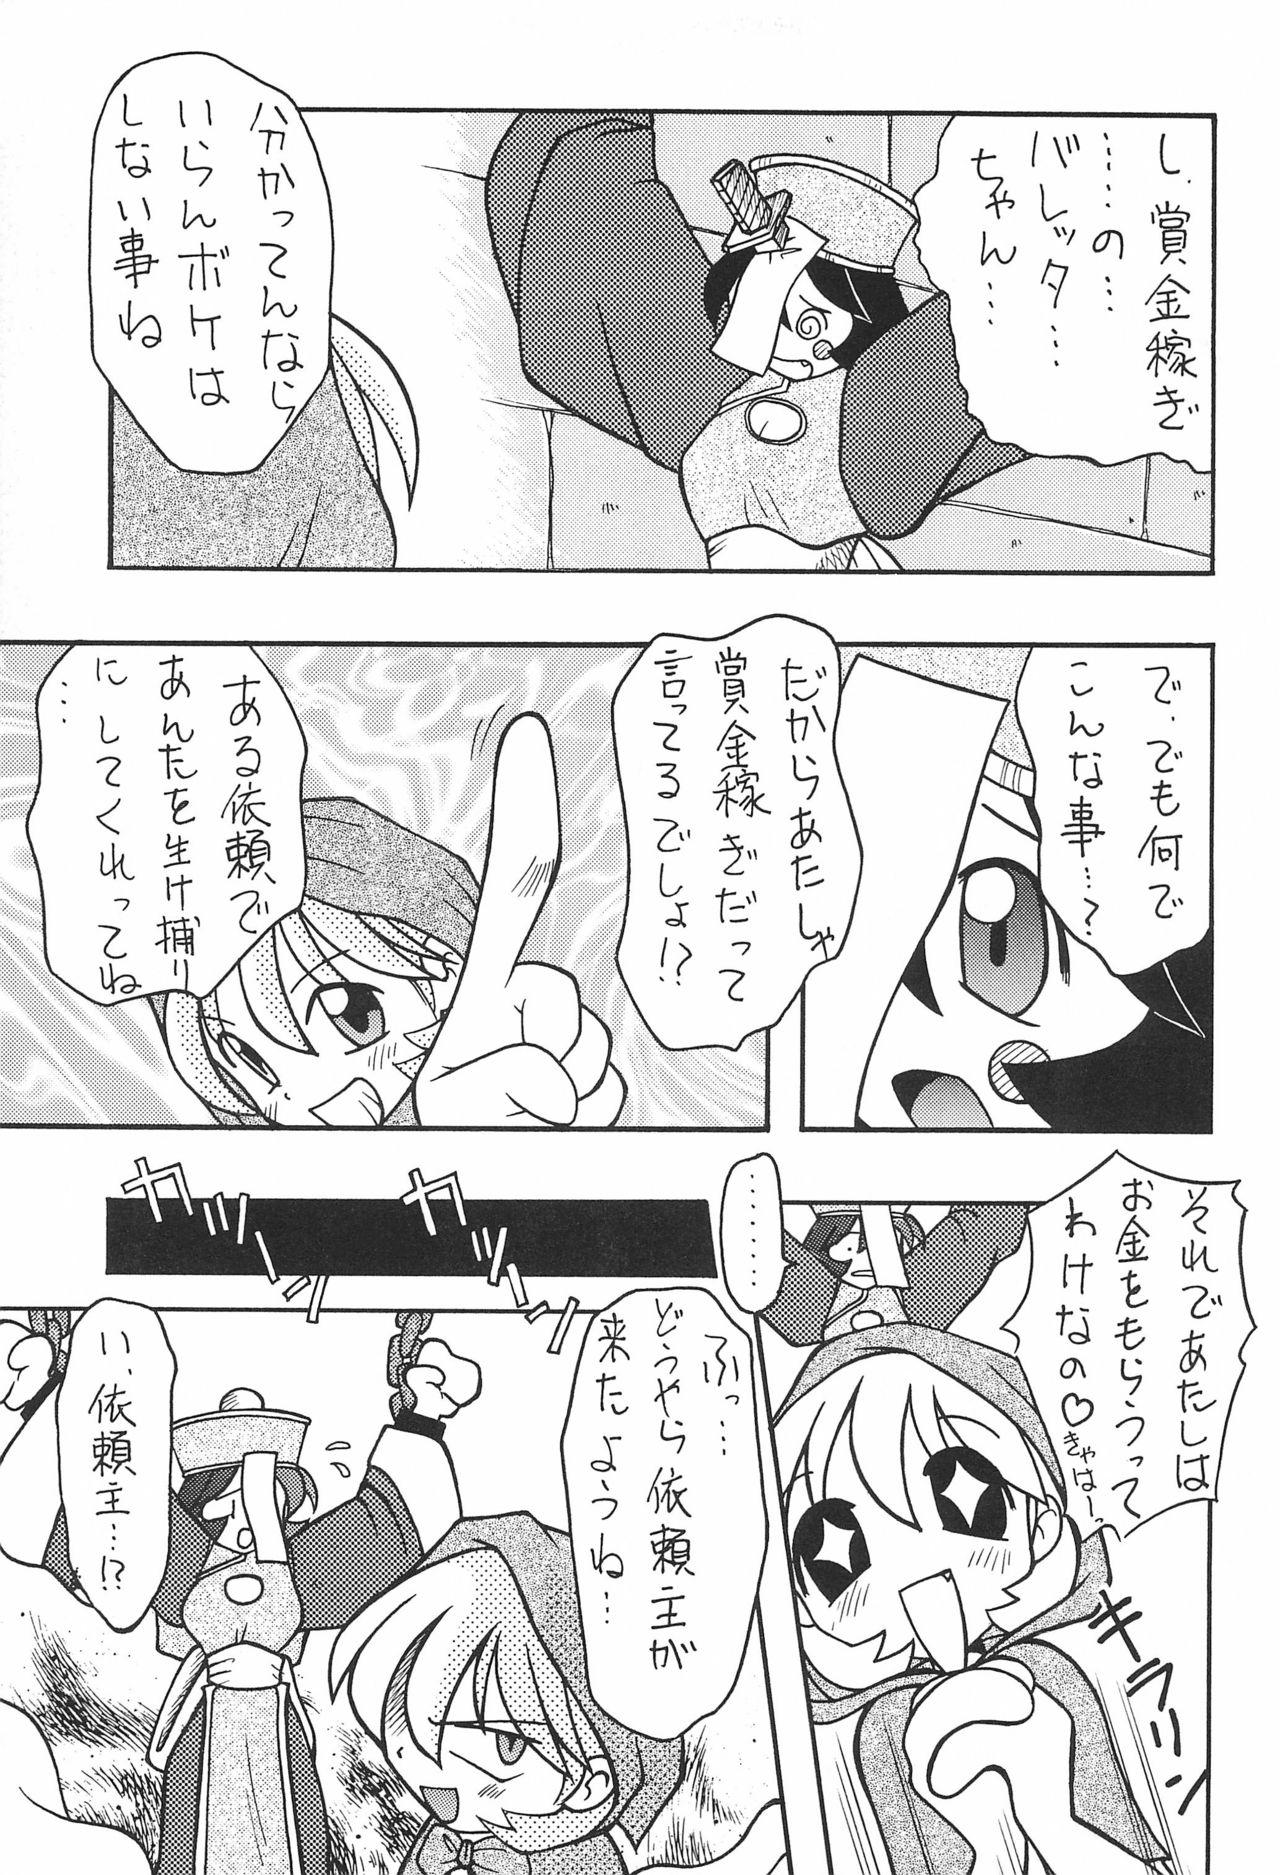 Ass Fucking Akazukin to Issho - Darkstalkers Shemale Porn - Page 7